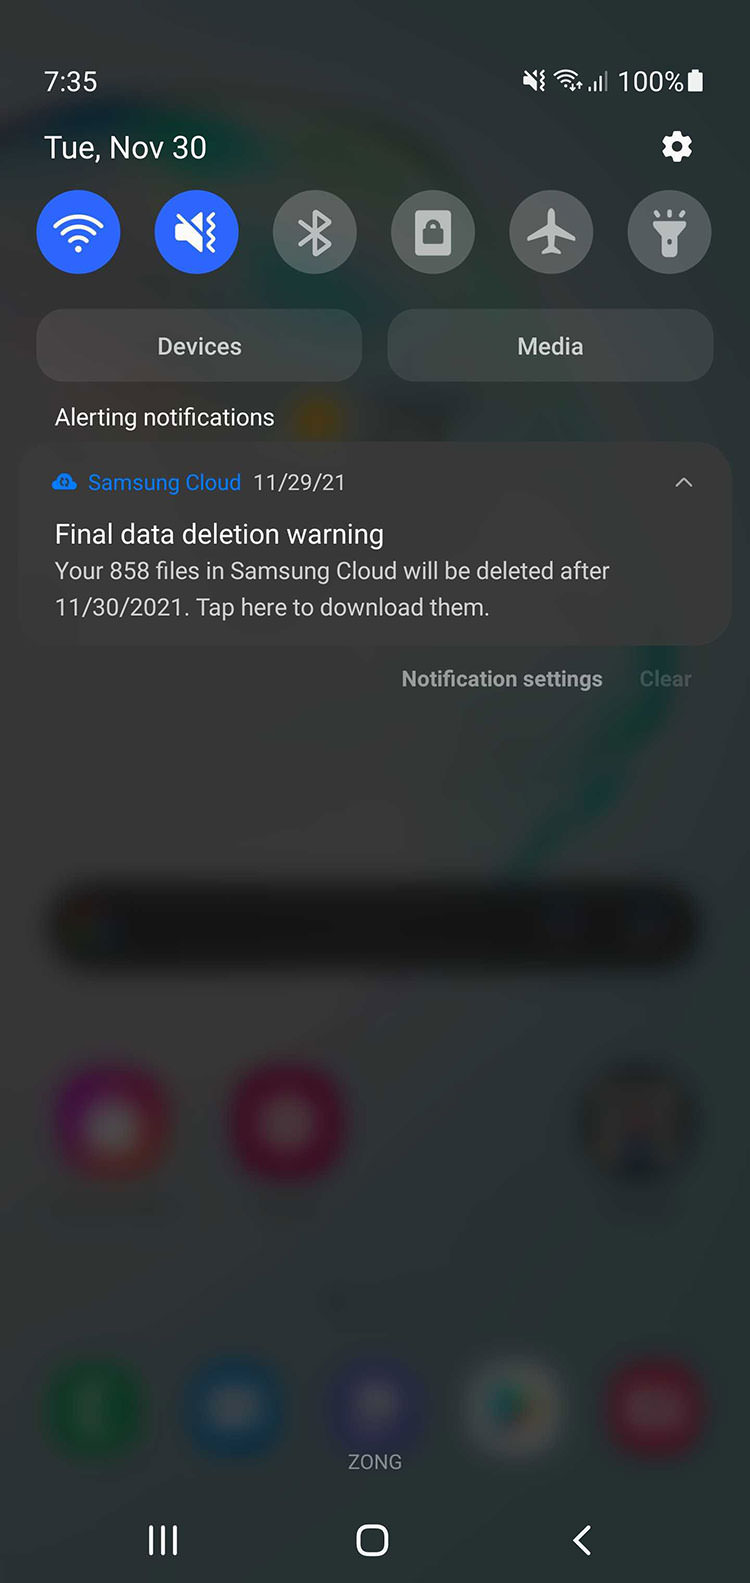 Warning to delete user information from Samsung cloud drive